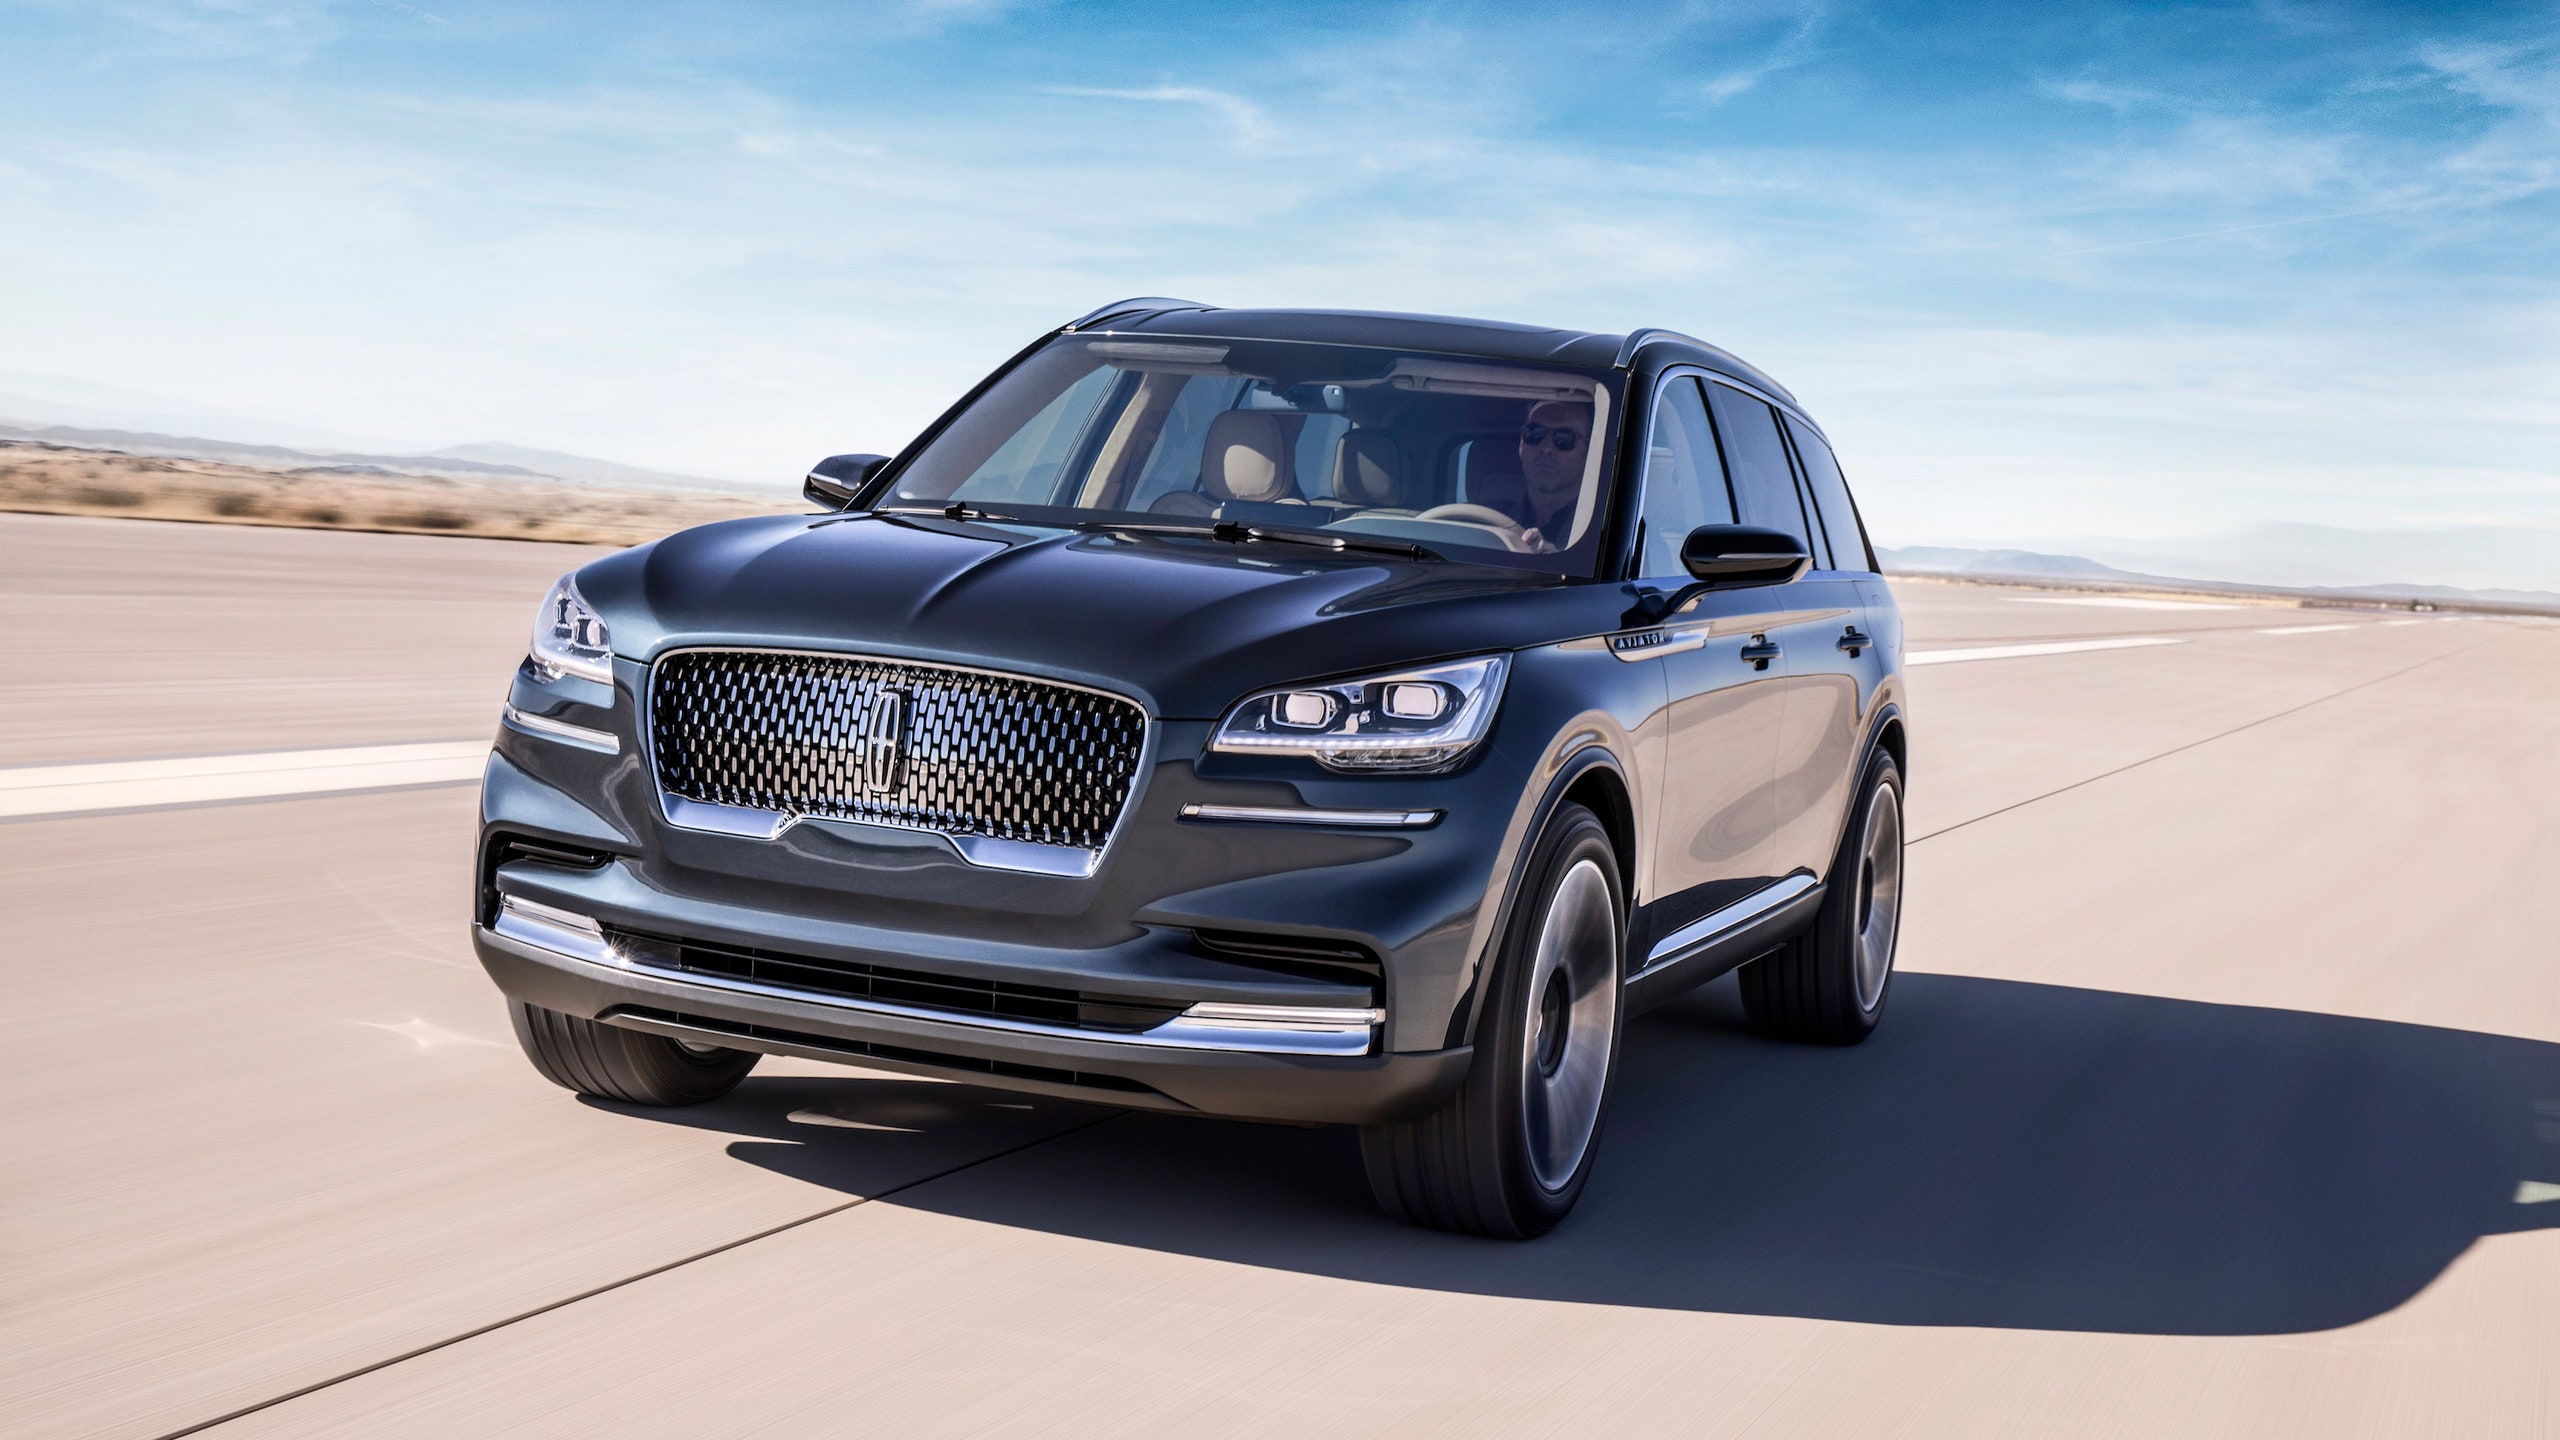 Lincoln's All-New Aviator Is Proof the Brand Is Shifting in a New Direction  | Architectural Digest